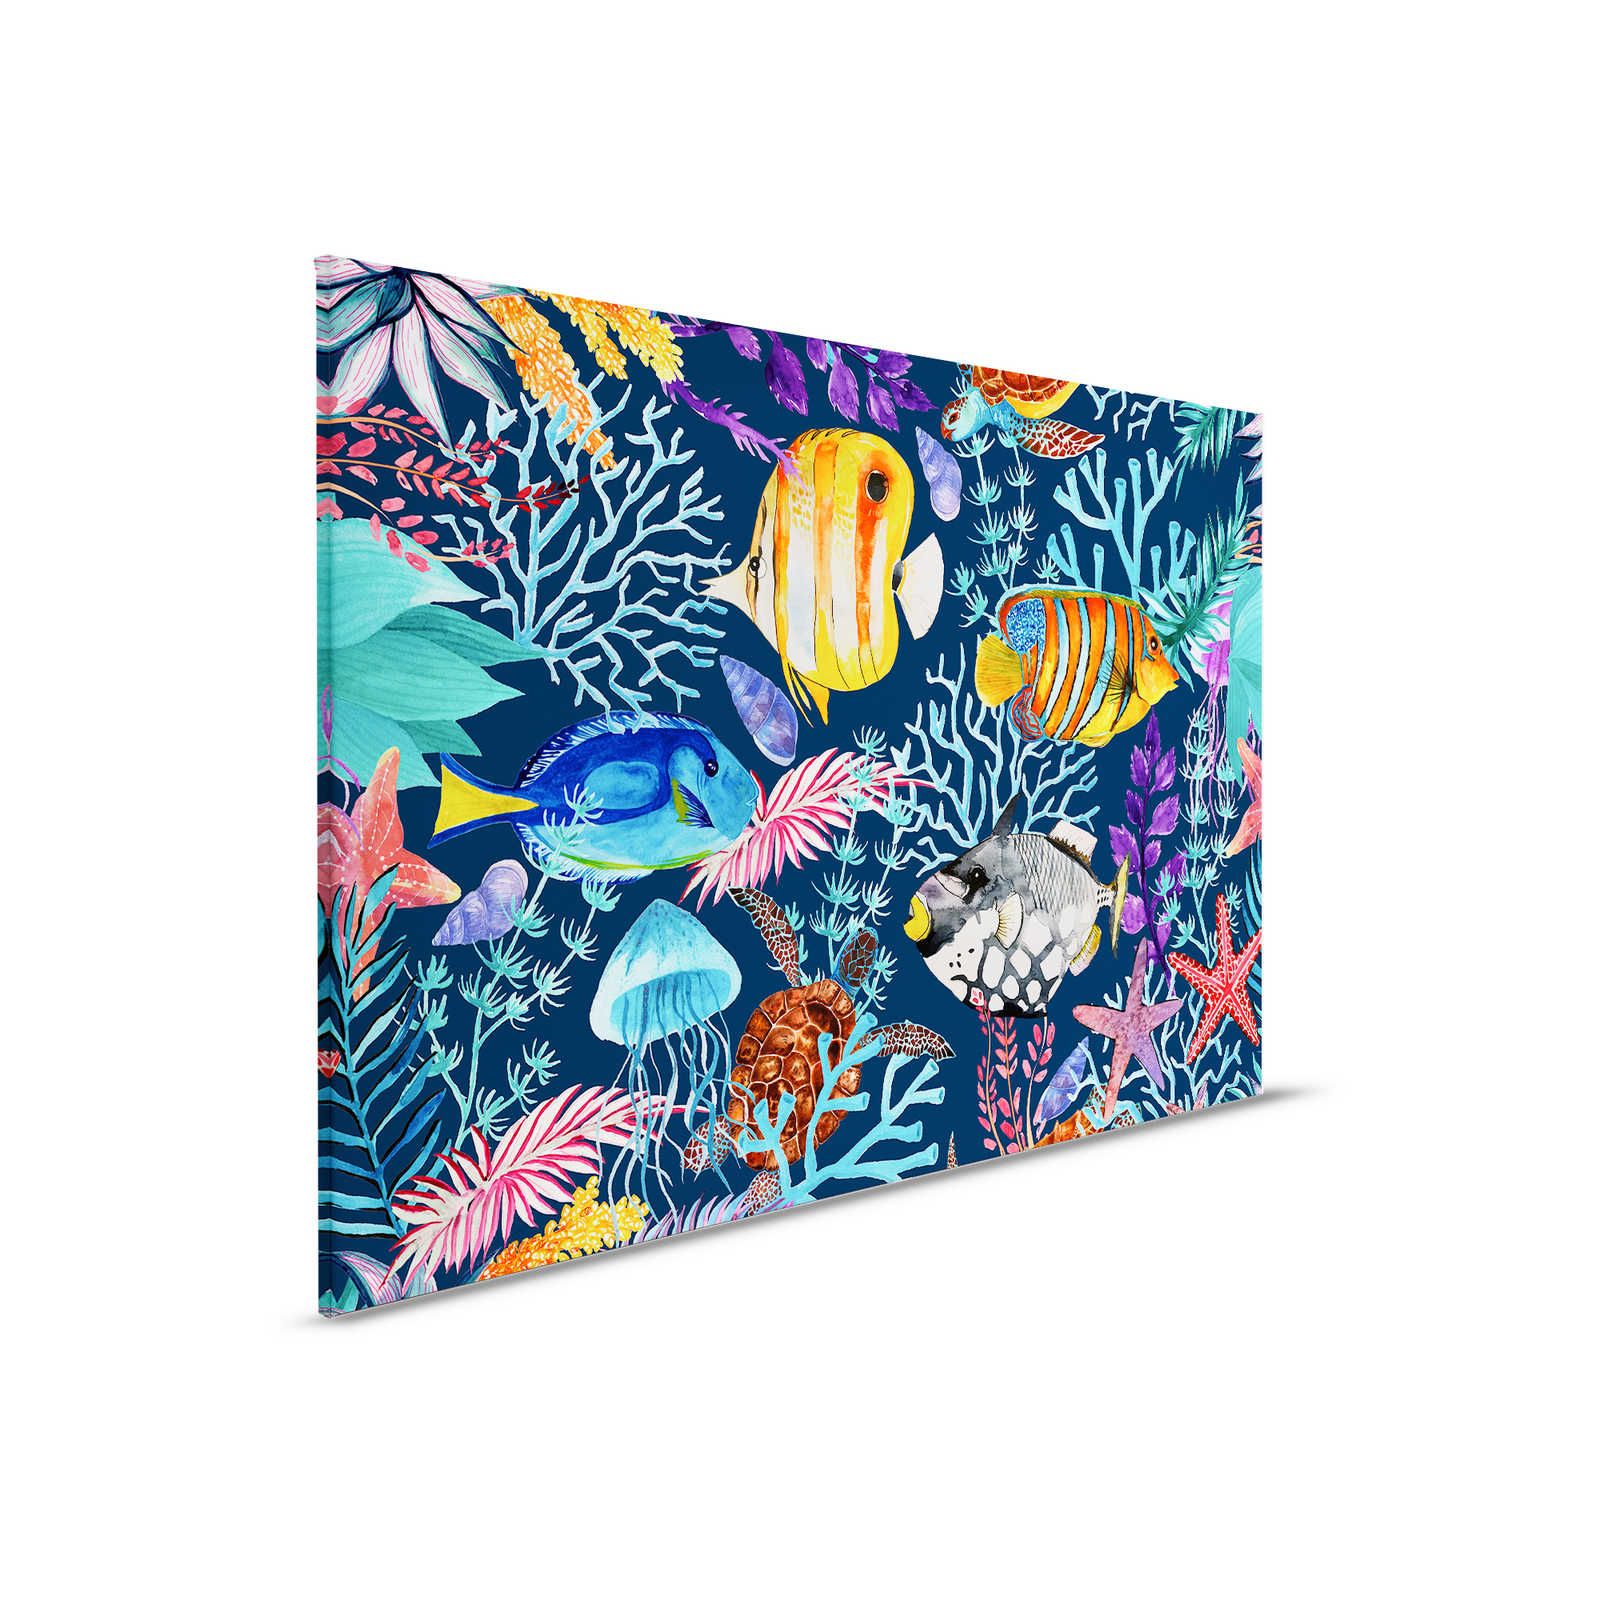 Underwater Canvas Painting with Colourful Fish & Starfish - 0.90 m x 0.60 m
